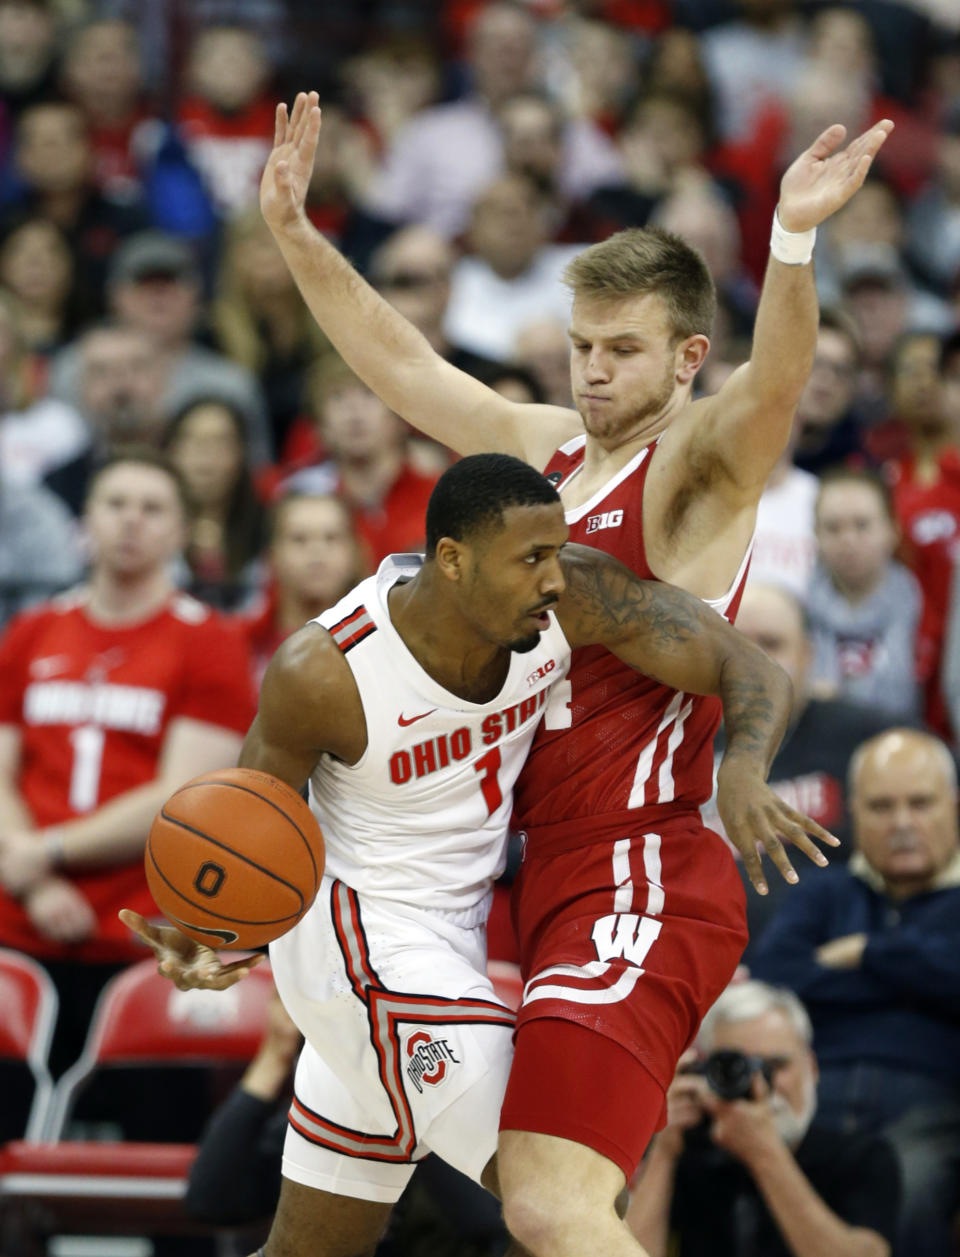 Ohio State guard Luther Muhammad, left, drives in front of Wisconsin guard Brad Davidson during the first half of an NCAA college basketball game in Columbus, Ohio, Friday, Jan. 3, 2020. (AP Photo/Paul Vernon)